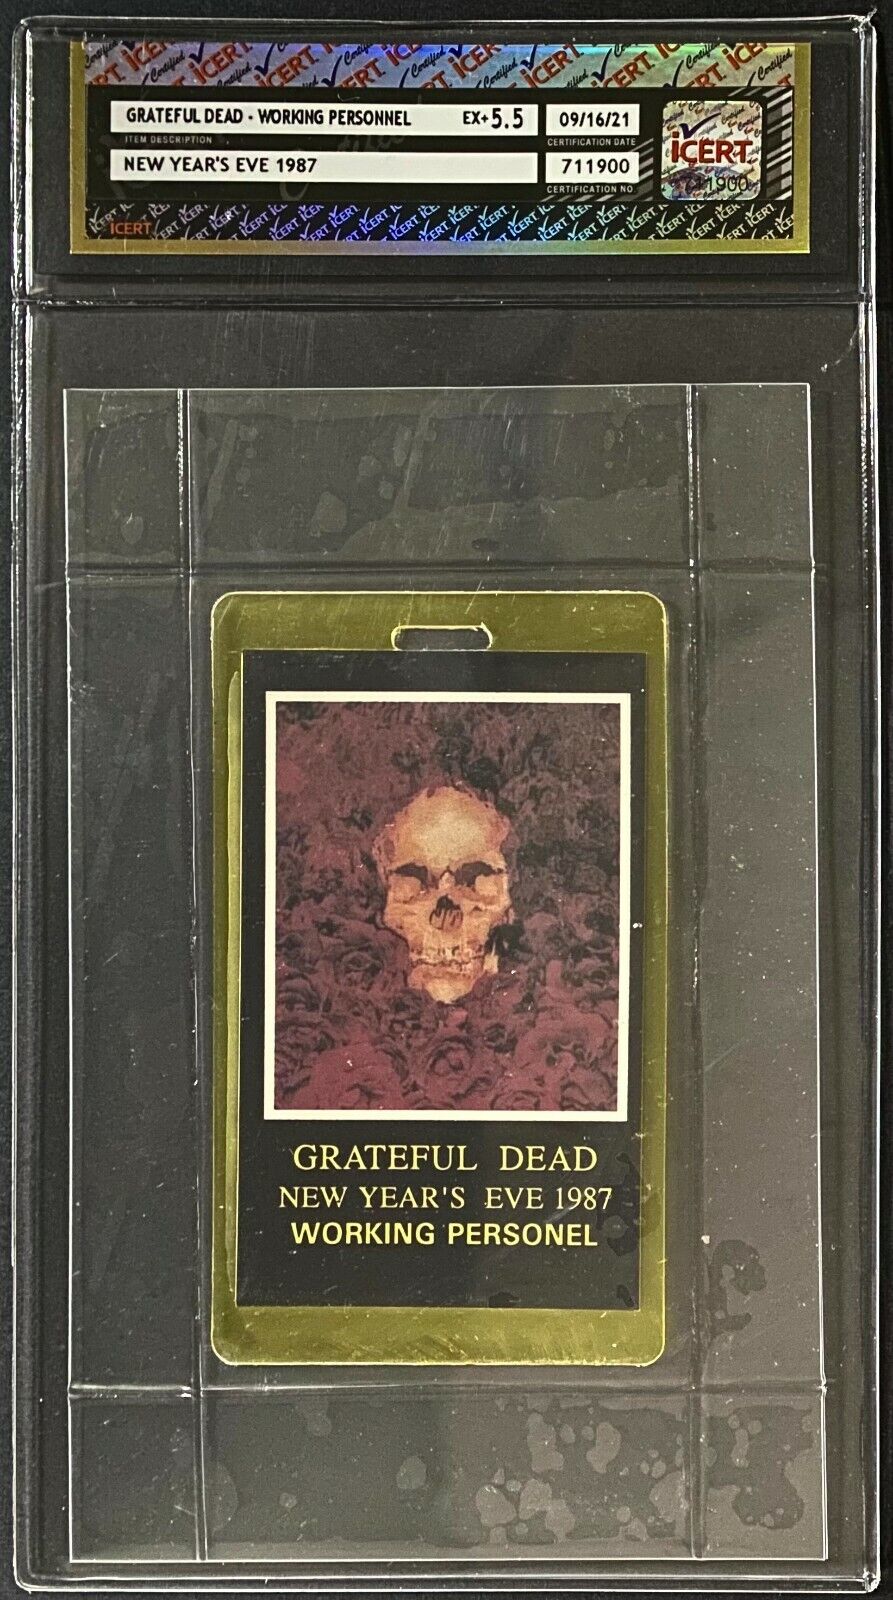 1987 Grateful Dead - Working Personnel Pass New Years Eve iCert